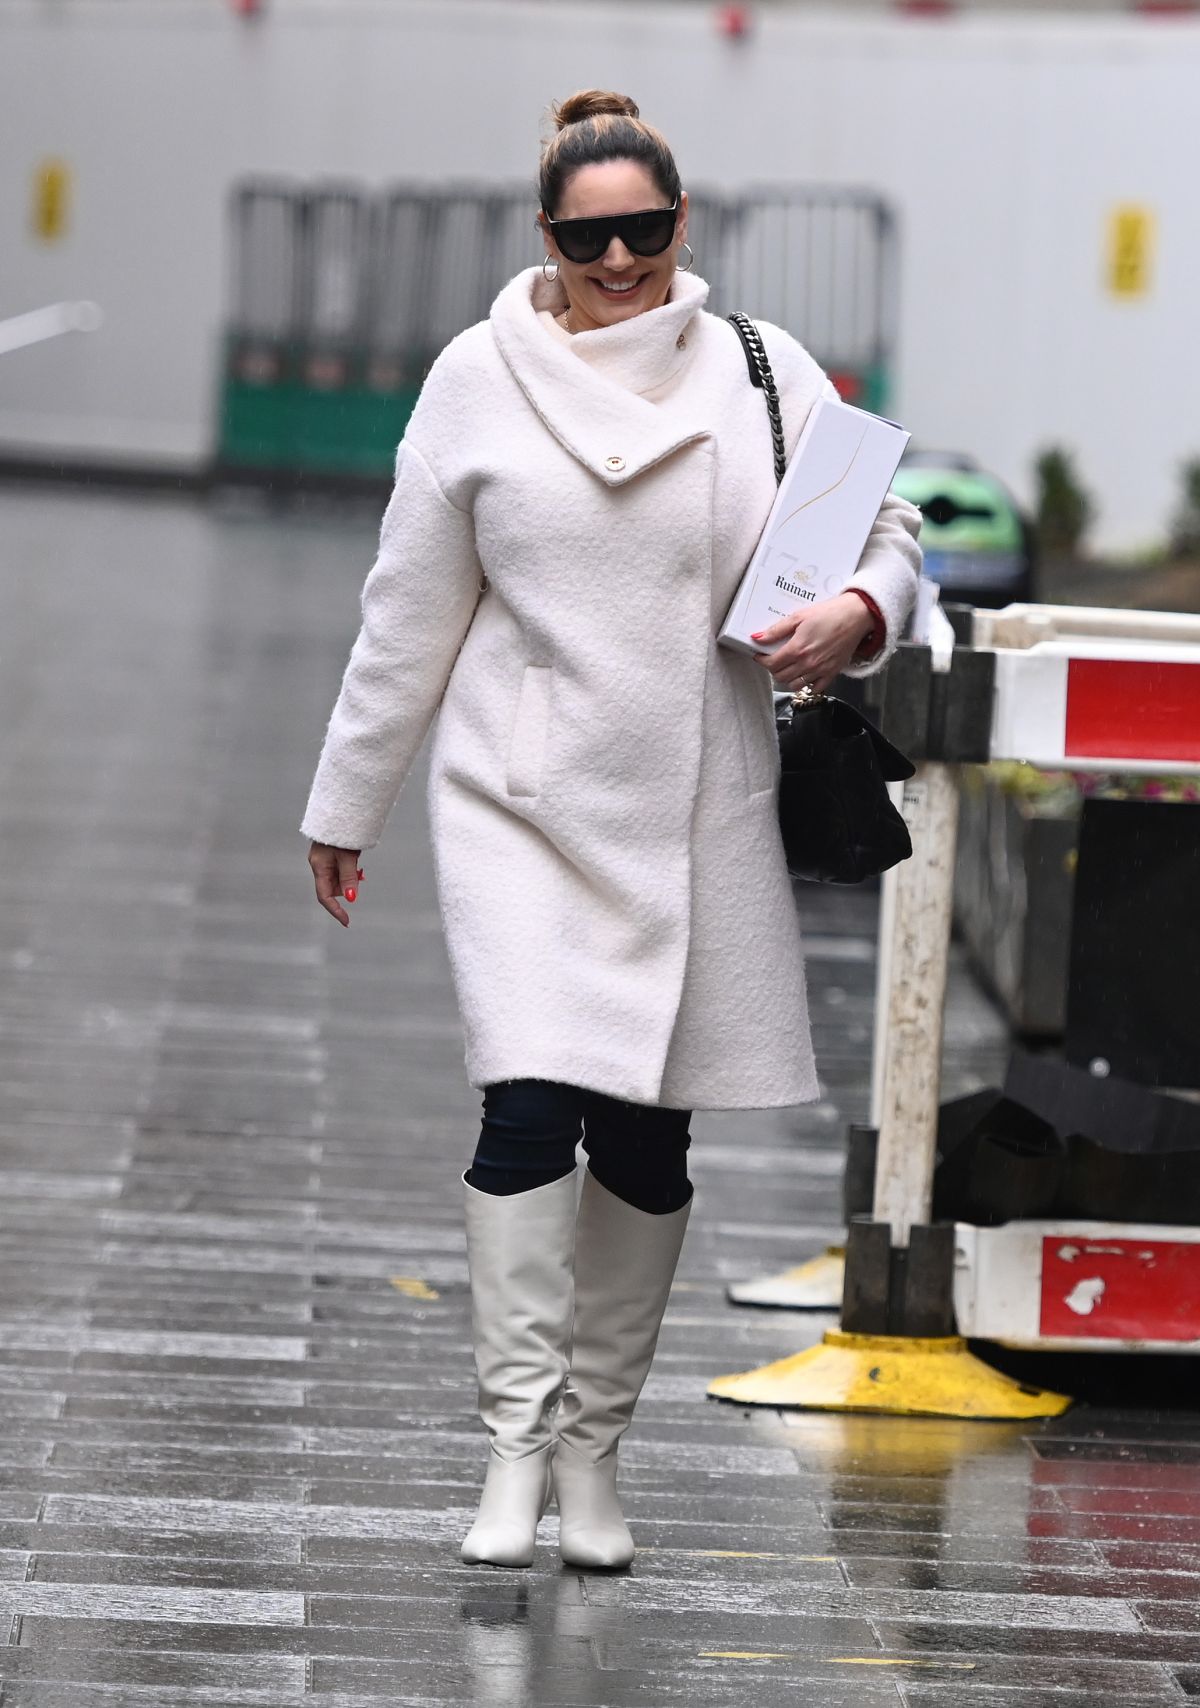 179310301_kelly-brook-in-a-white-coat-and-boots-at-global-radio-in-london-12-23-2020-9.jpg